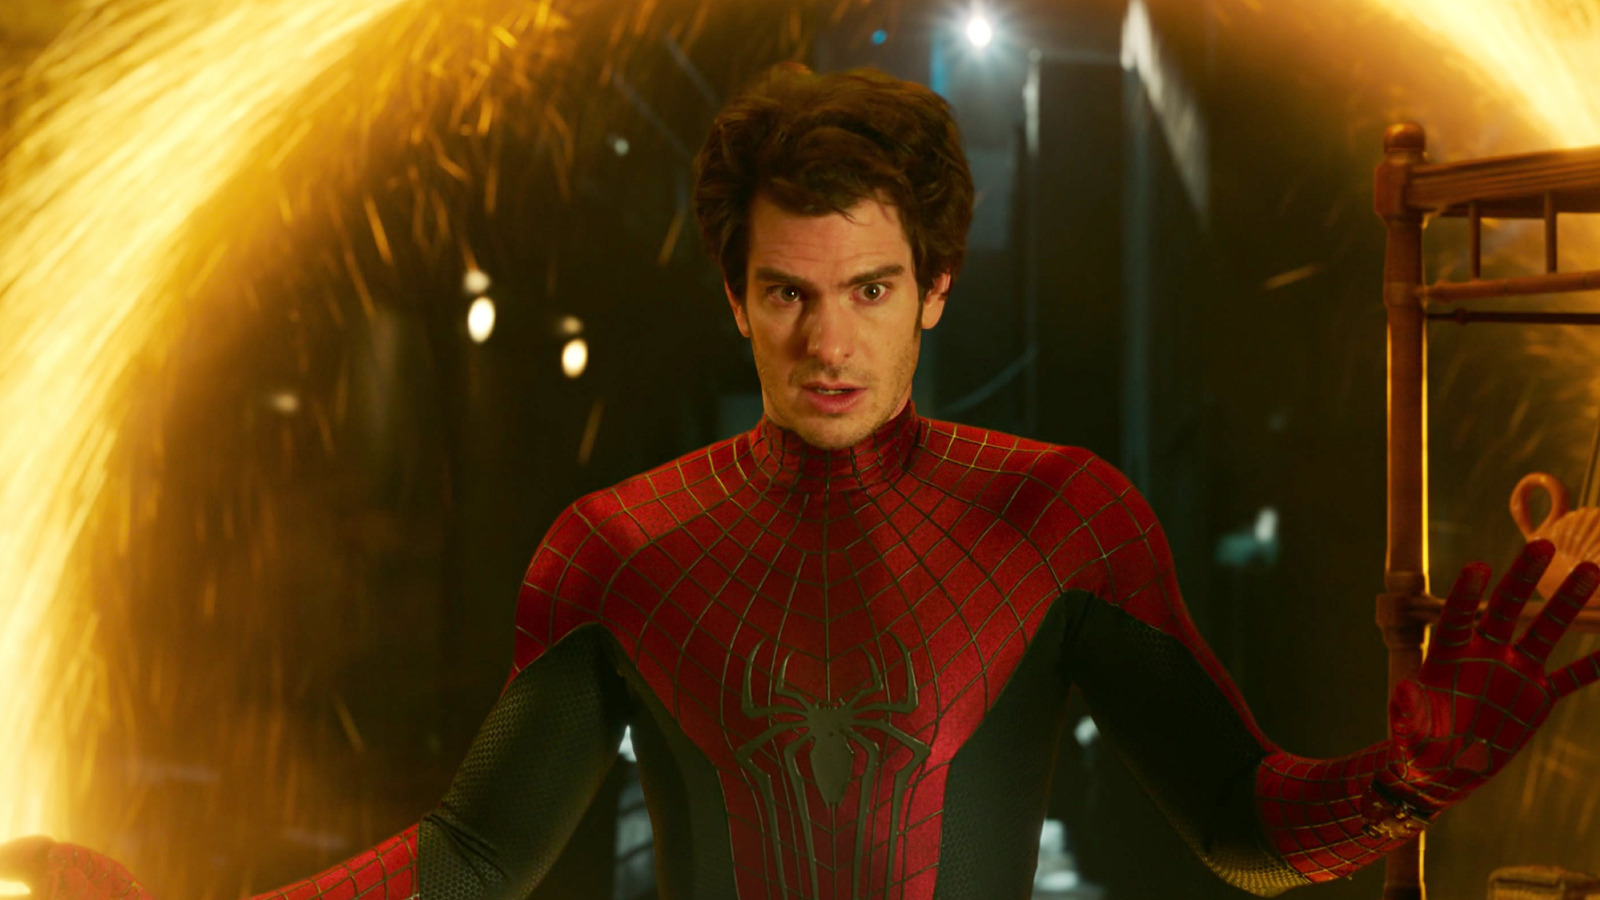 Could The Amazing Spider-Man 3 With Andrew Garfield Still Happen After His MCU Debut?